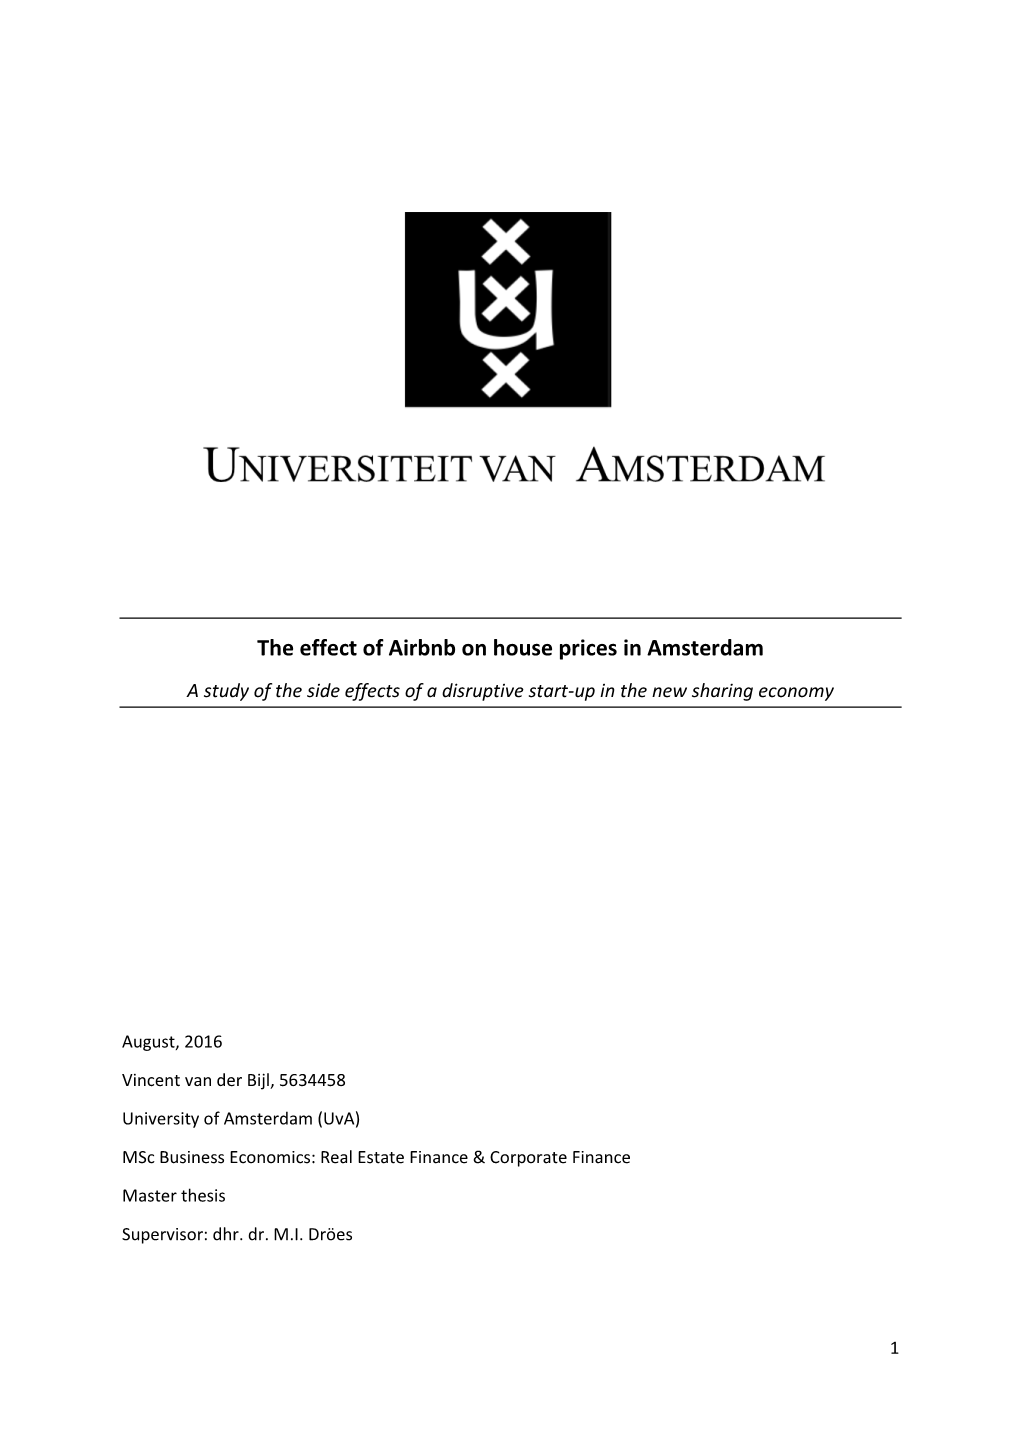 The Effect of Airbnb on House Prices in Amsterdam a Study of the Side Effects of a Disruptive Start-Up in the New Sharing Economy